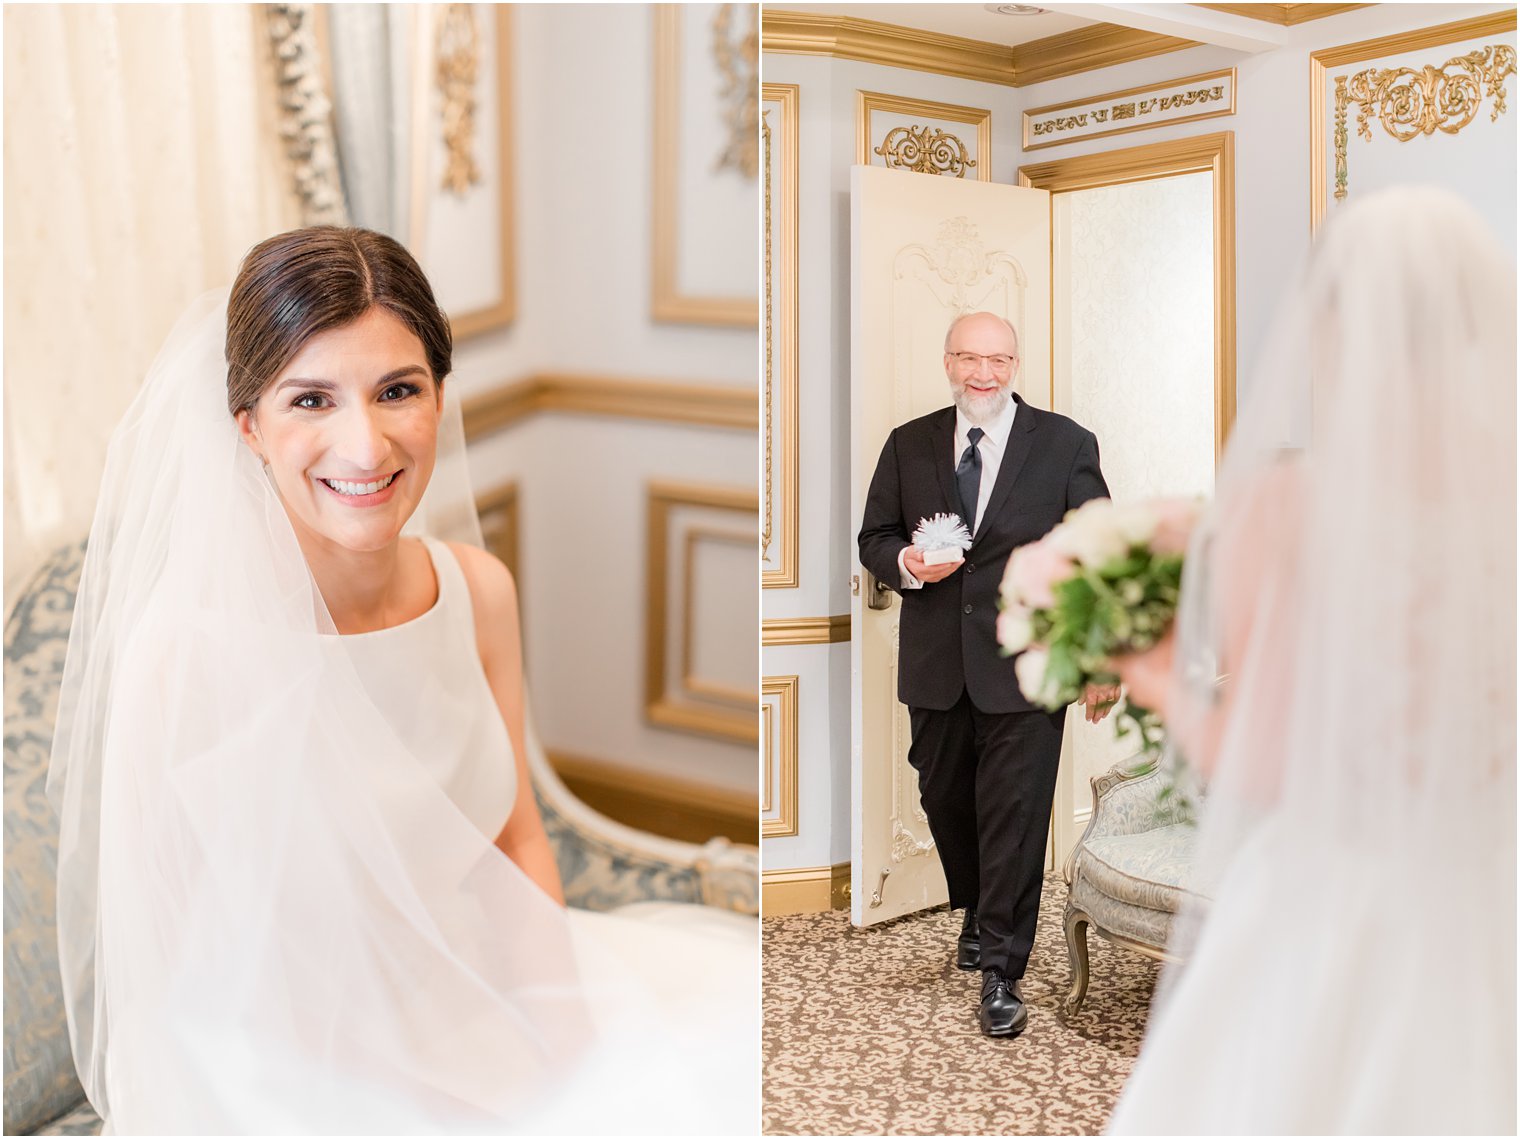 Daddy-daughter reveal in bridal suite at The Manor